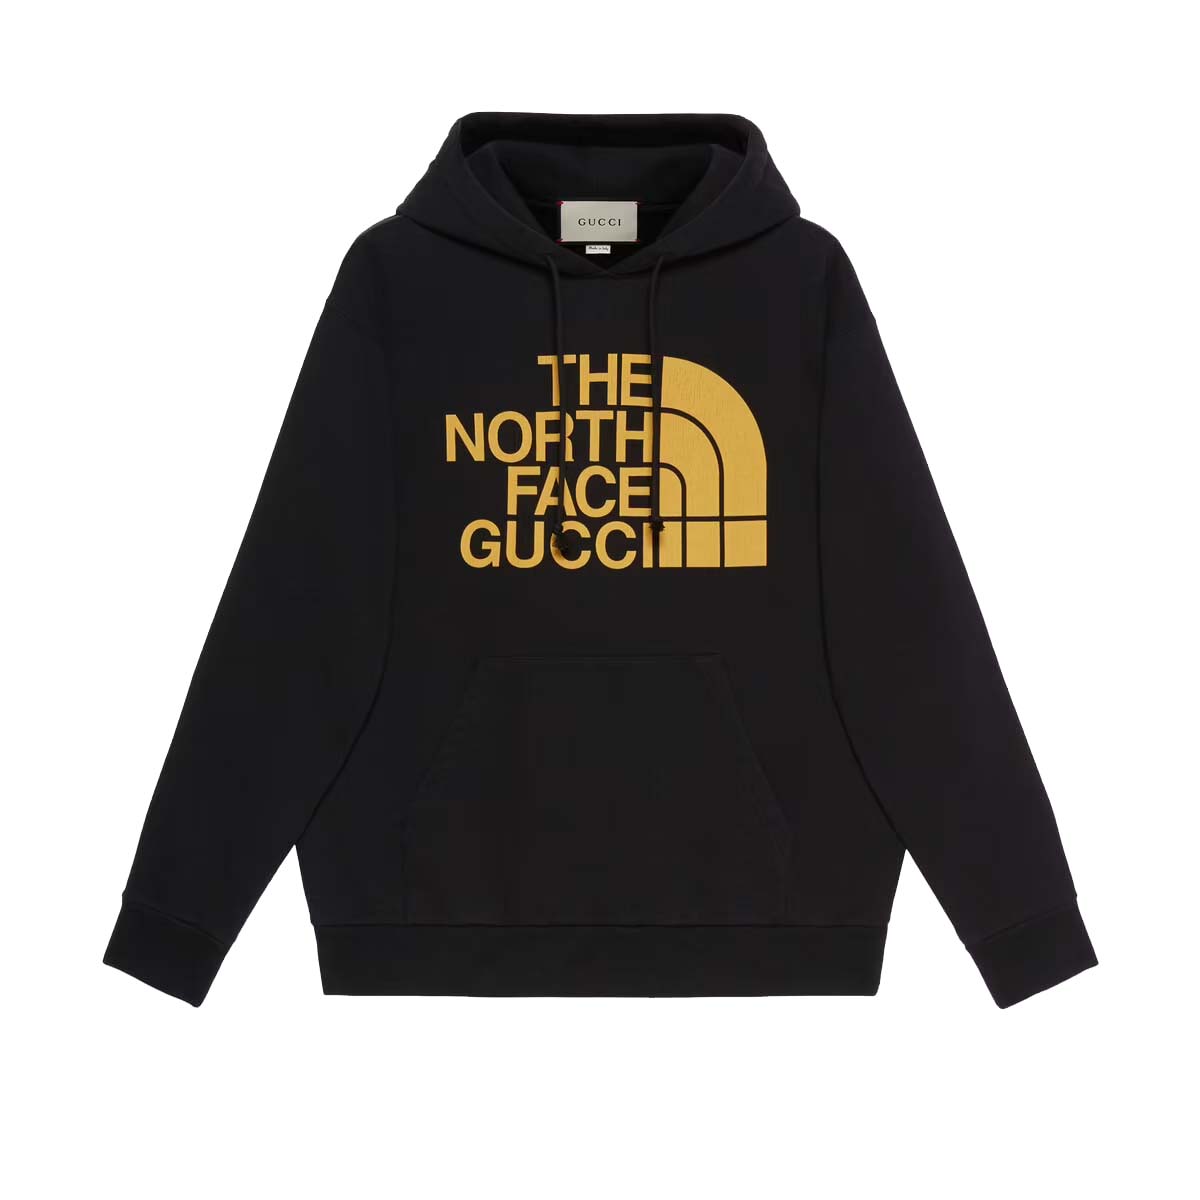 Gucci x The North Face Web Print Hoodie Black Men's - SS21 - US